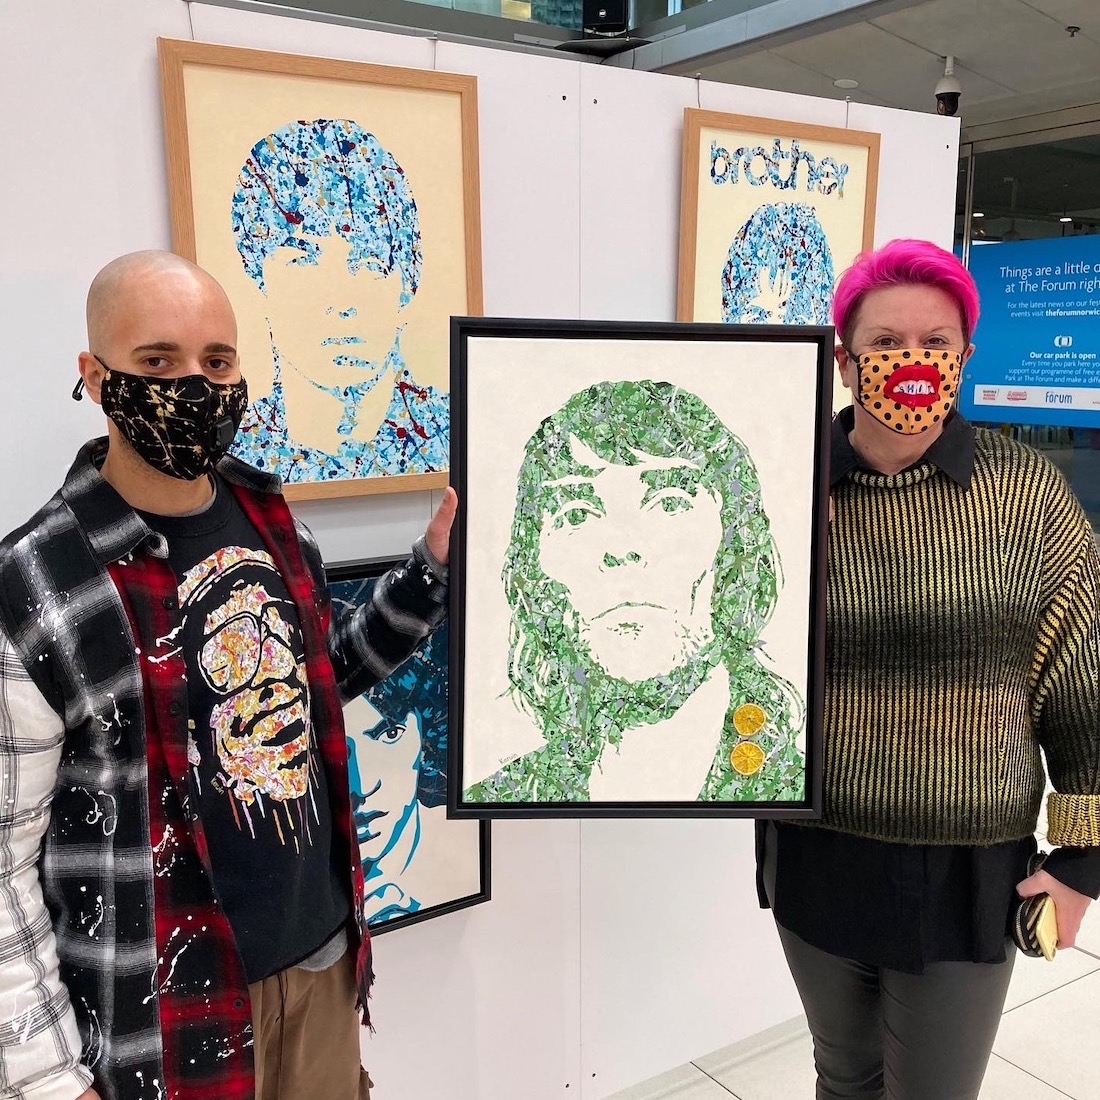 Kerwin Blackburn's Jackson Pollock-inspired pop art music paintings on display in his debut art exhibition at The Forum, Norwich December 2020 | By Kerwin prints | Ian Brown